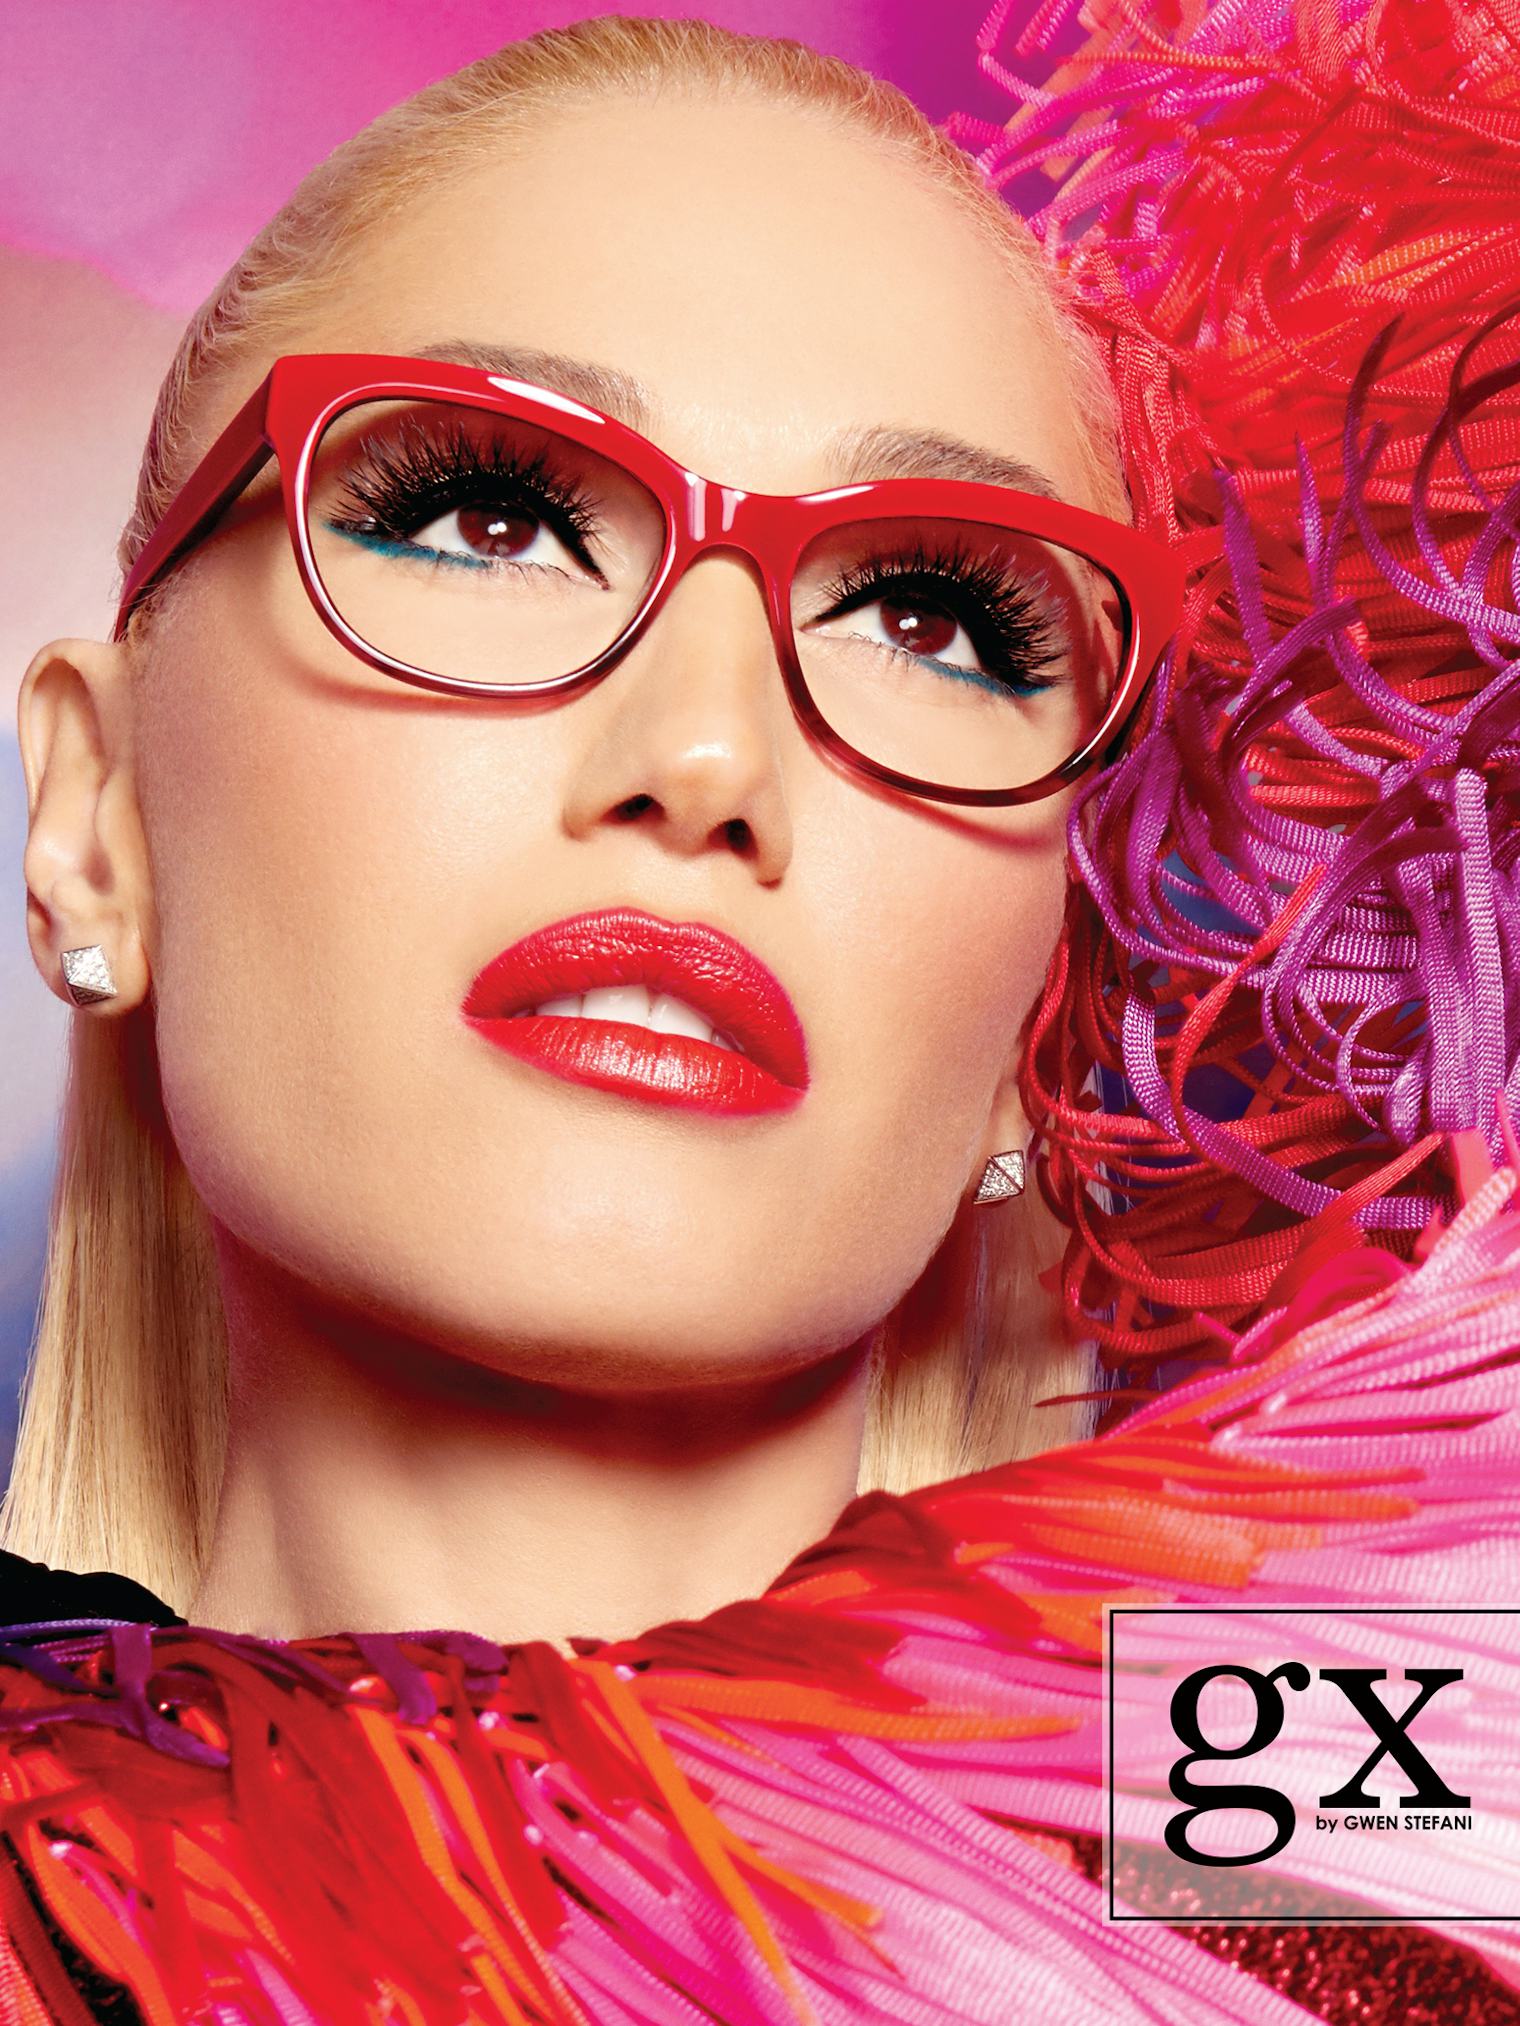 Gwen Stefani S Eyewear Collection Is Inspired By The Glasses She S Always Wanted To Wear